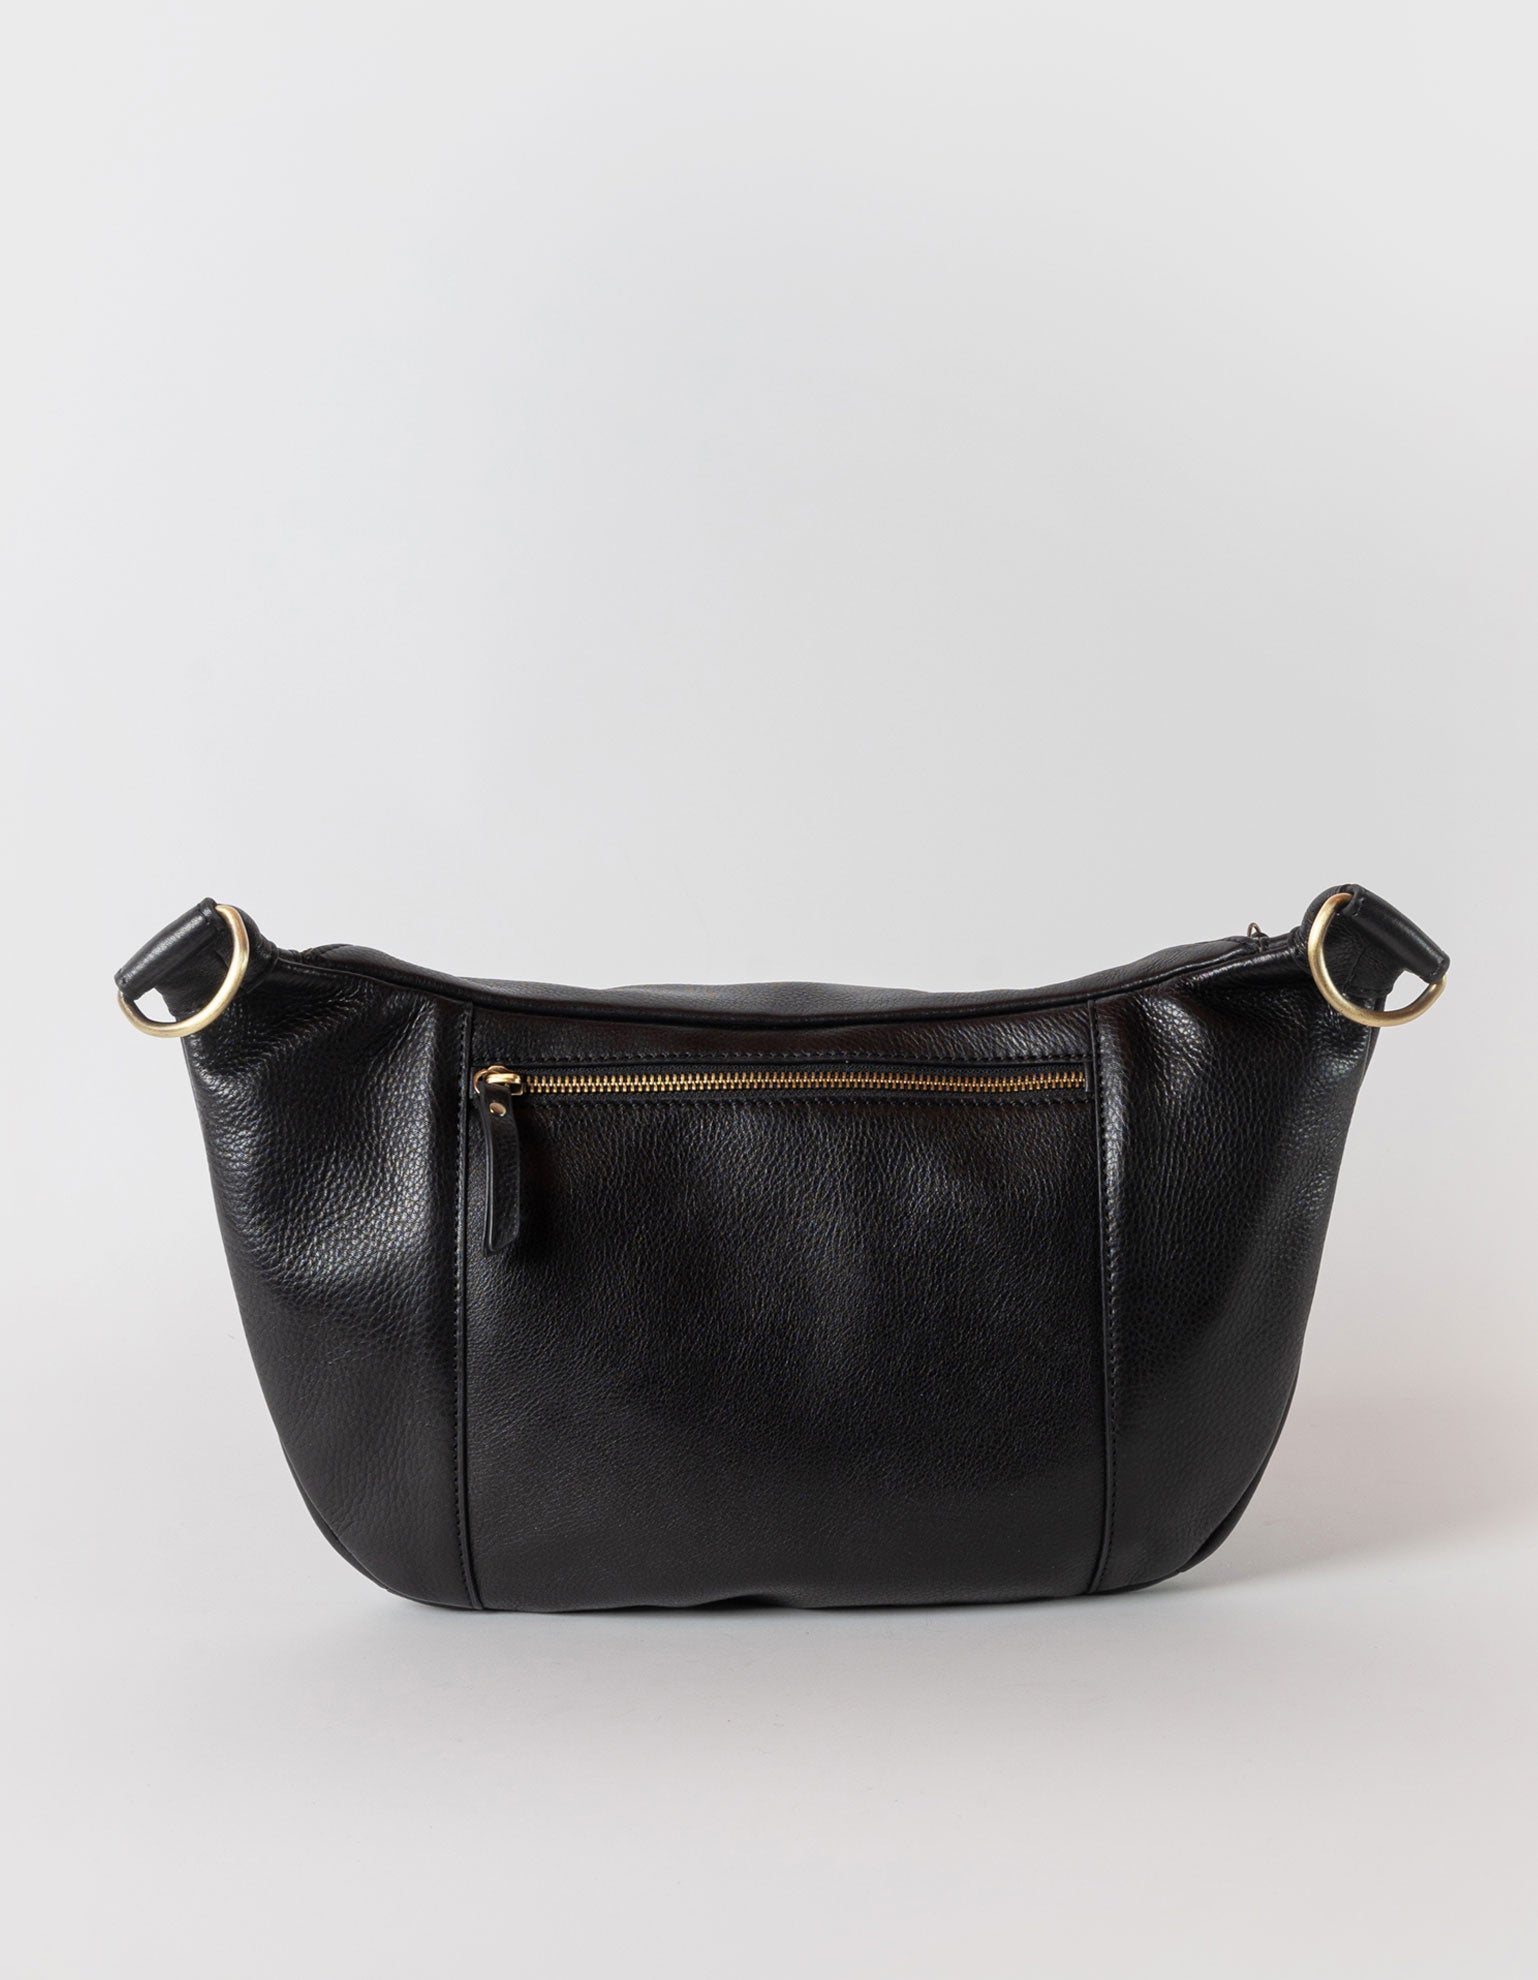 Drew Maxi in black soft grain leather without strap. Back product image.